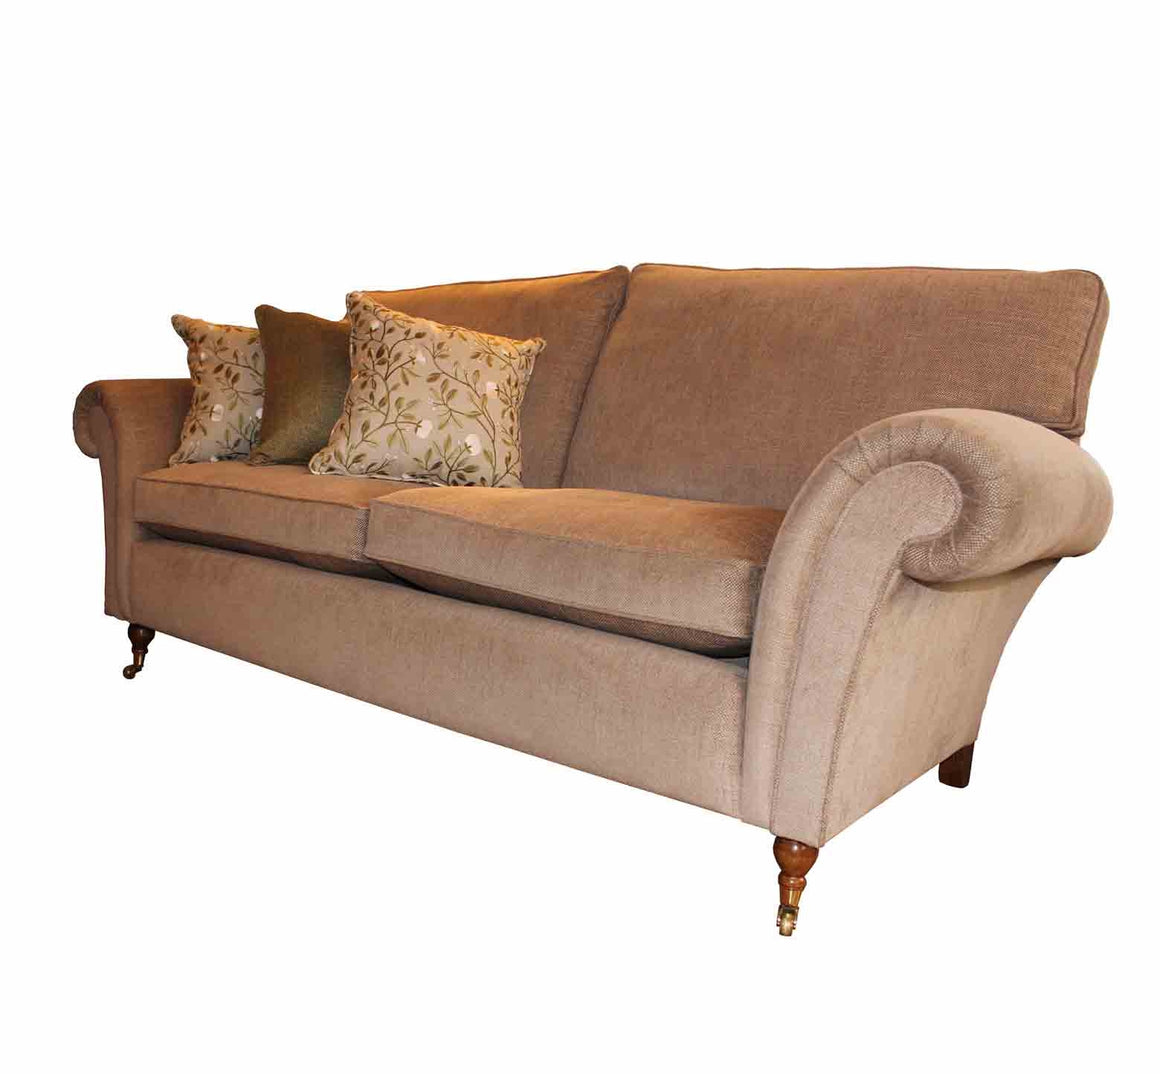 Henley Sofas and chairs in Sanderson Langtry HALF PRICE TO ORDER